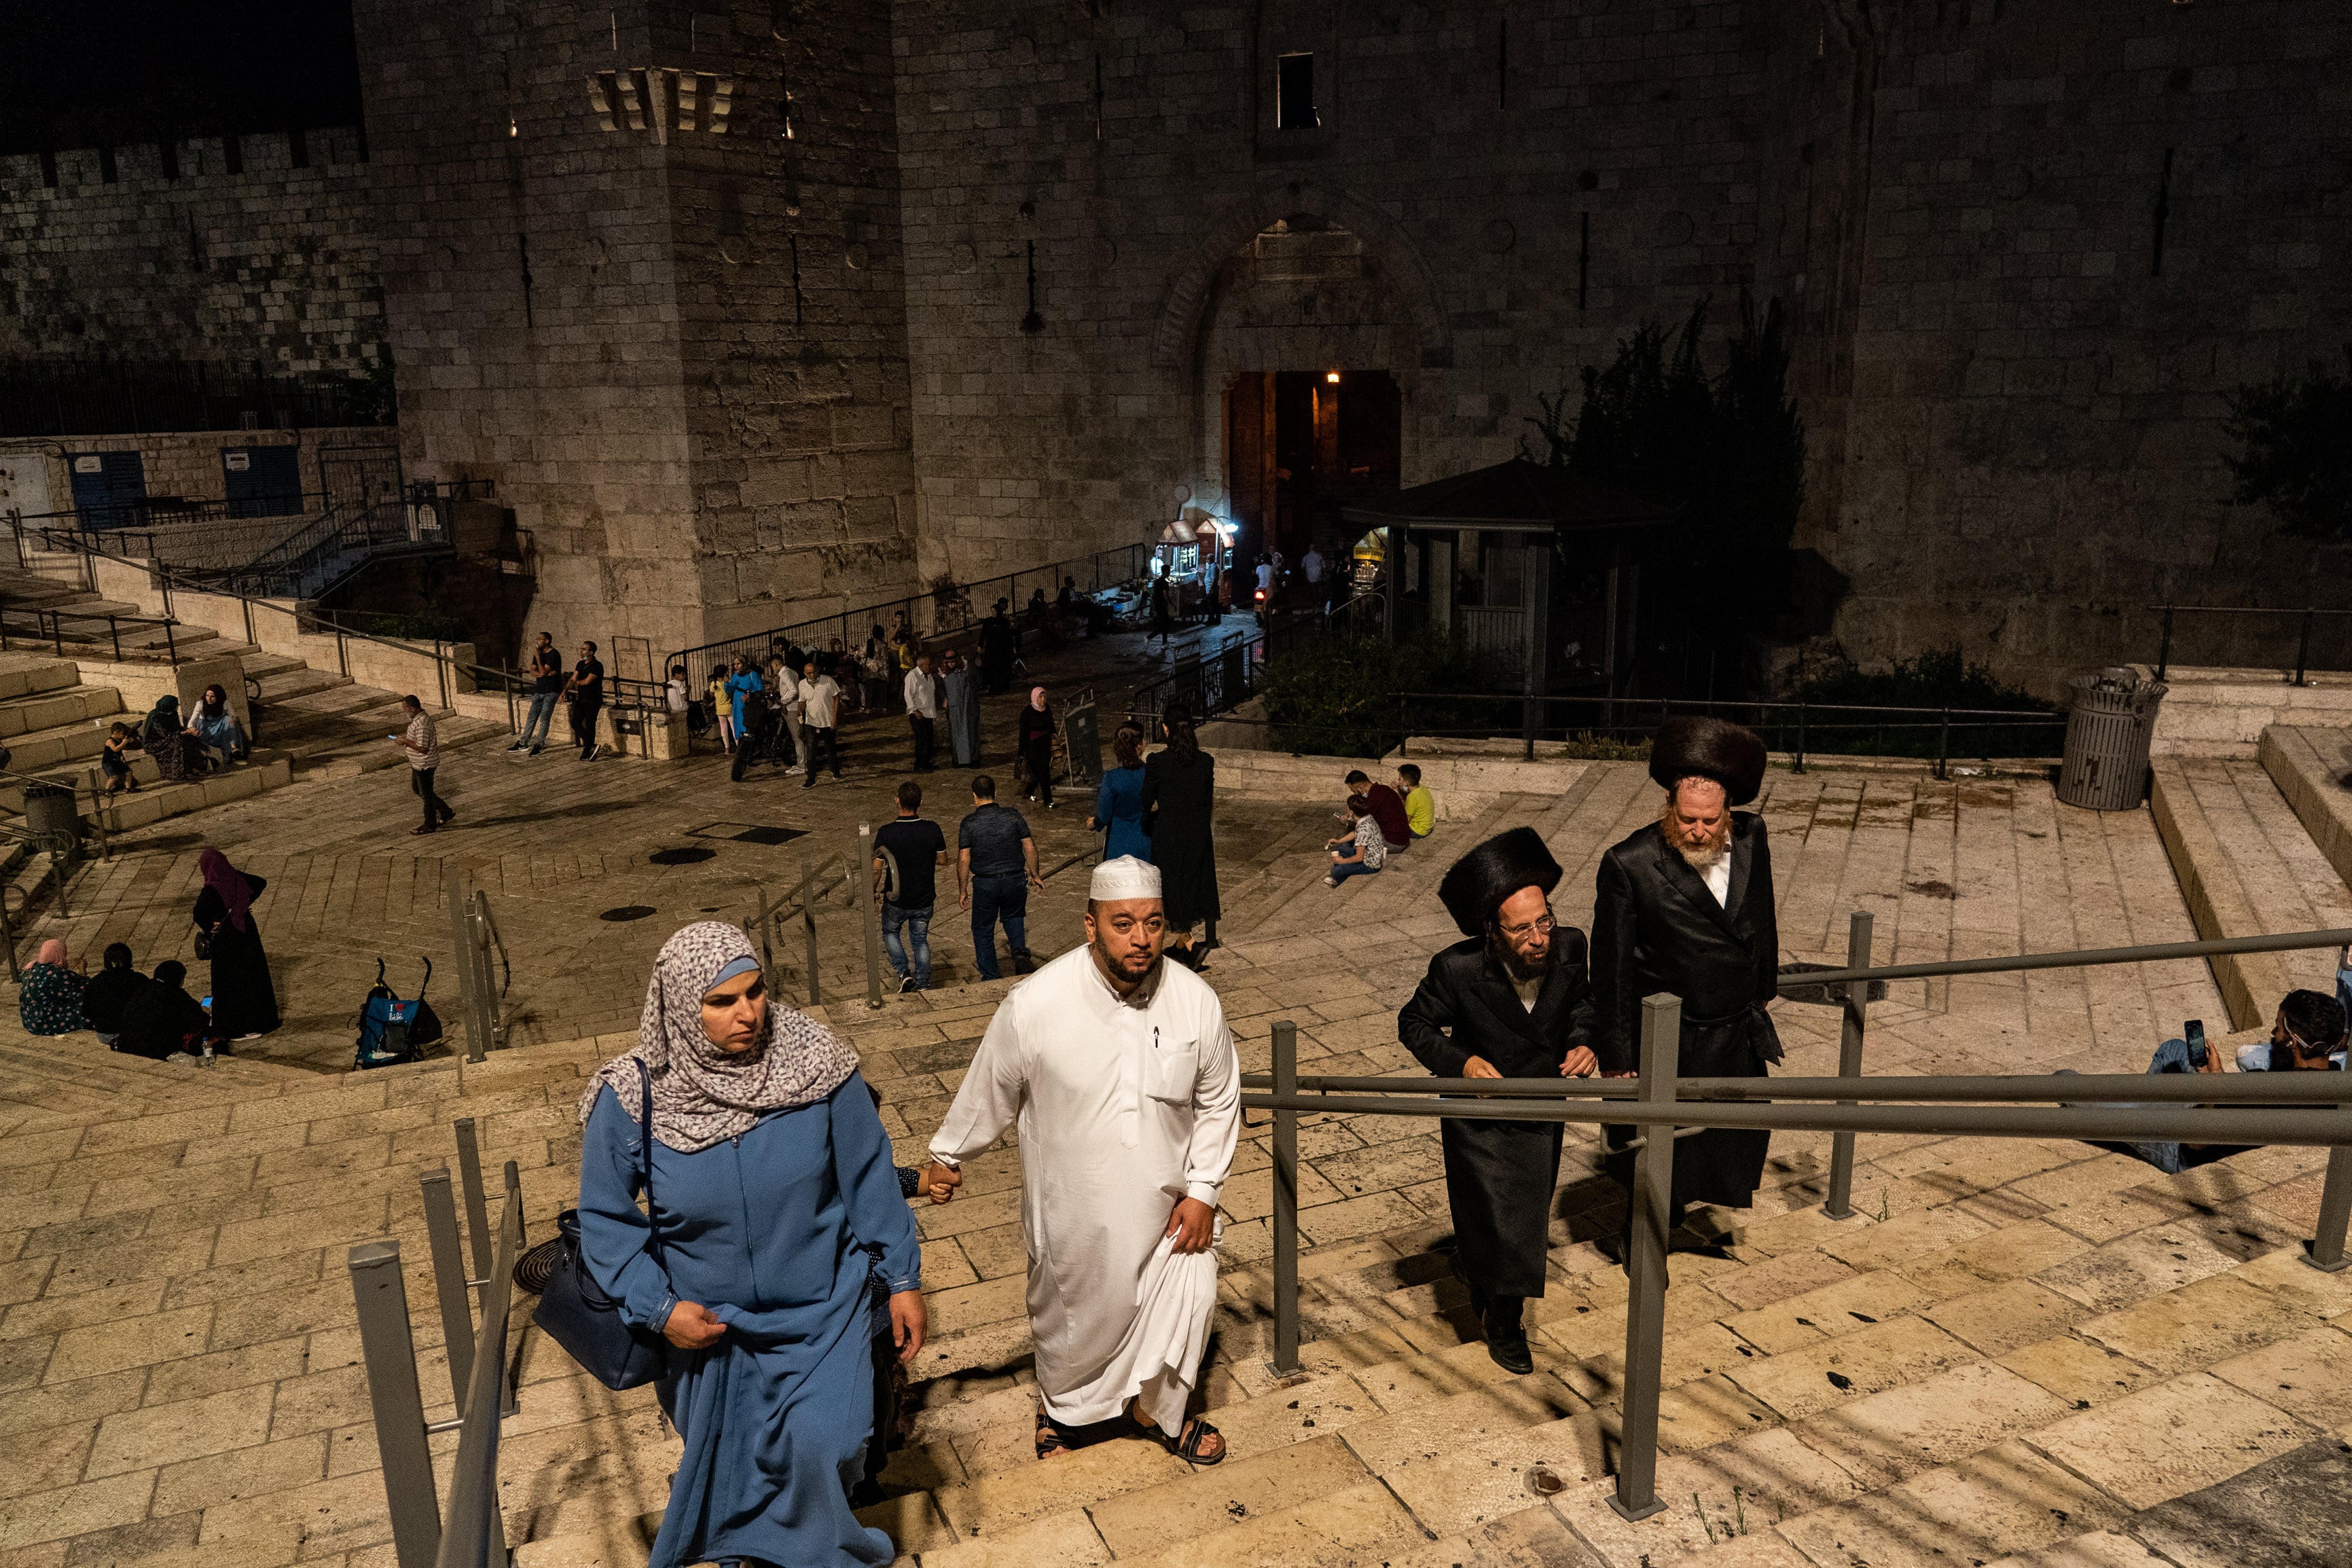 Muslims and Jews make their way out of Jerusalem’s Old City through Damascus Gate